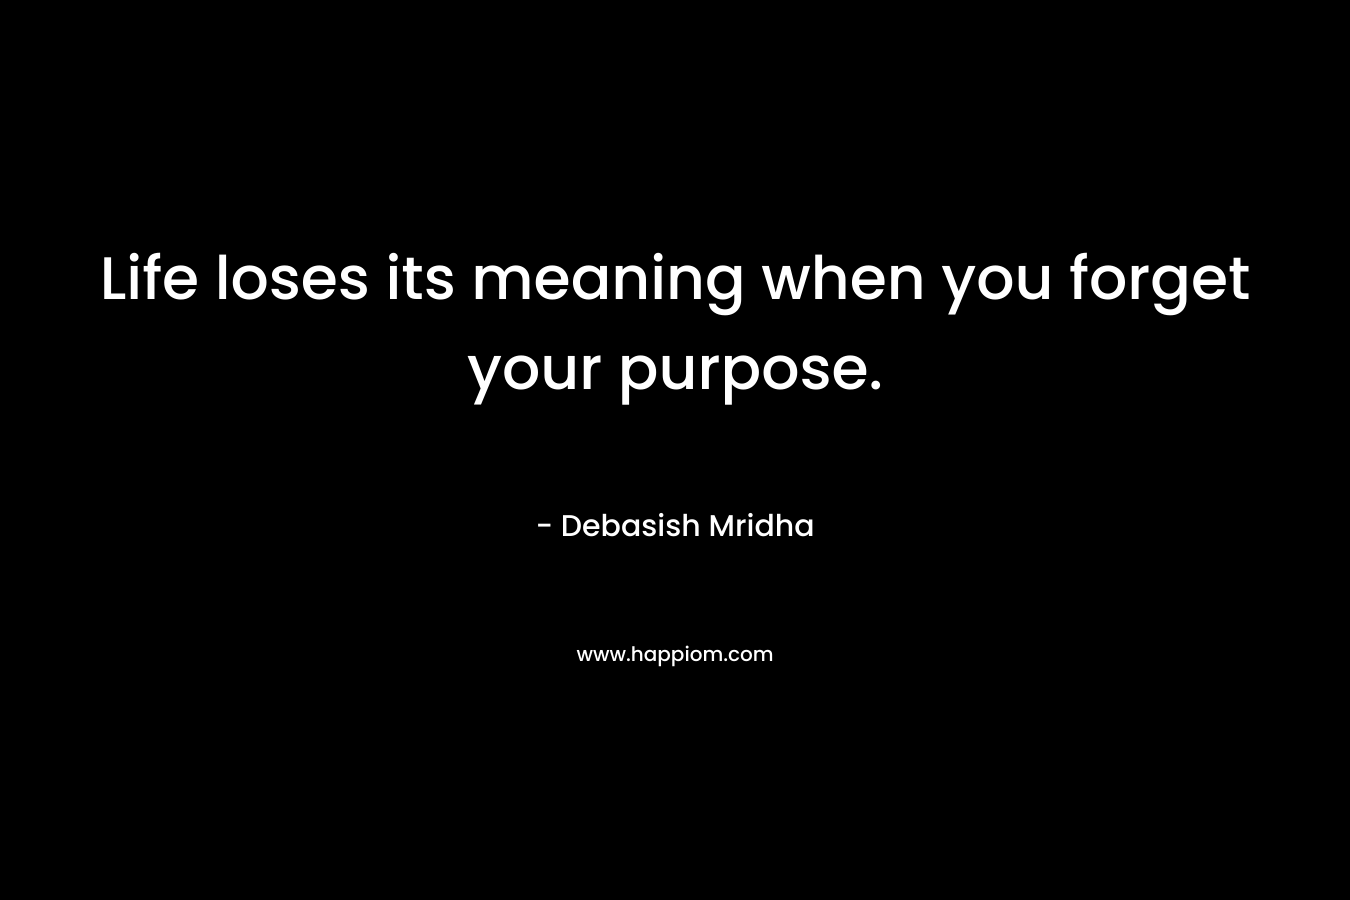 Life loses its meaning when you forget your purpose.